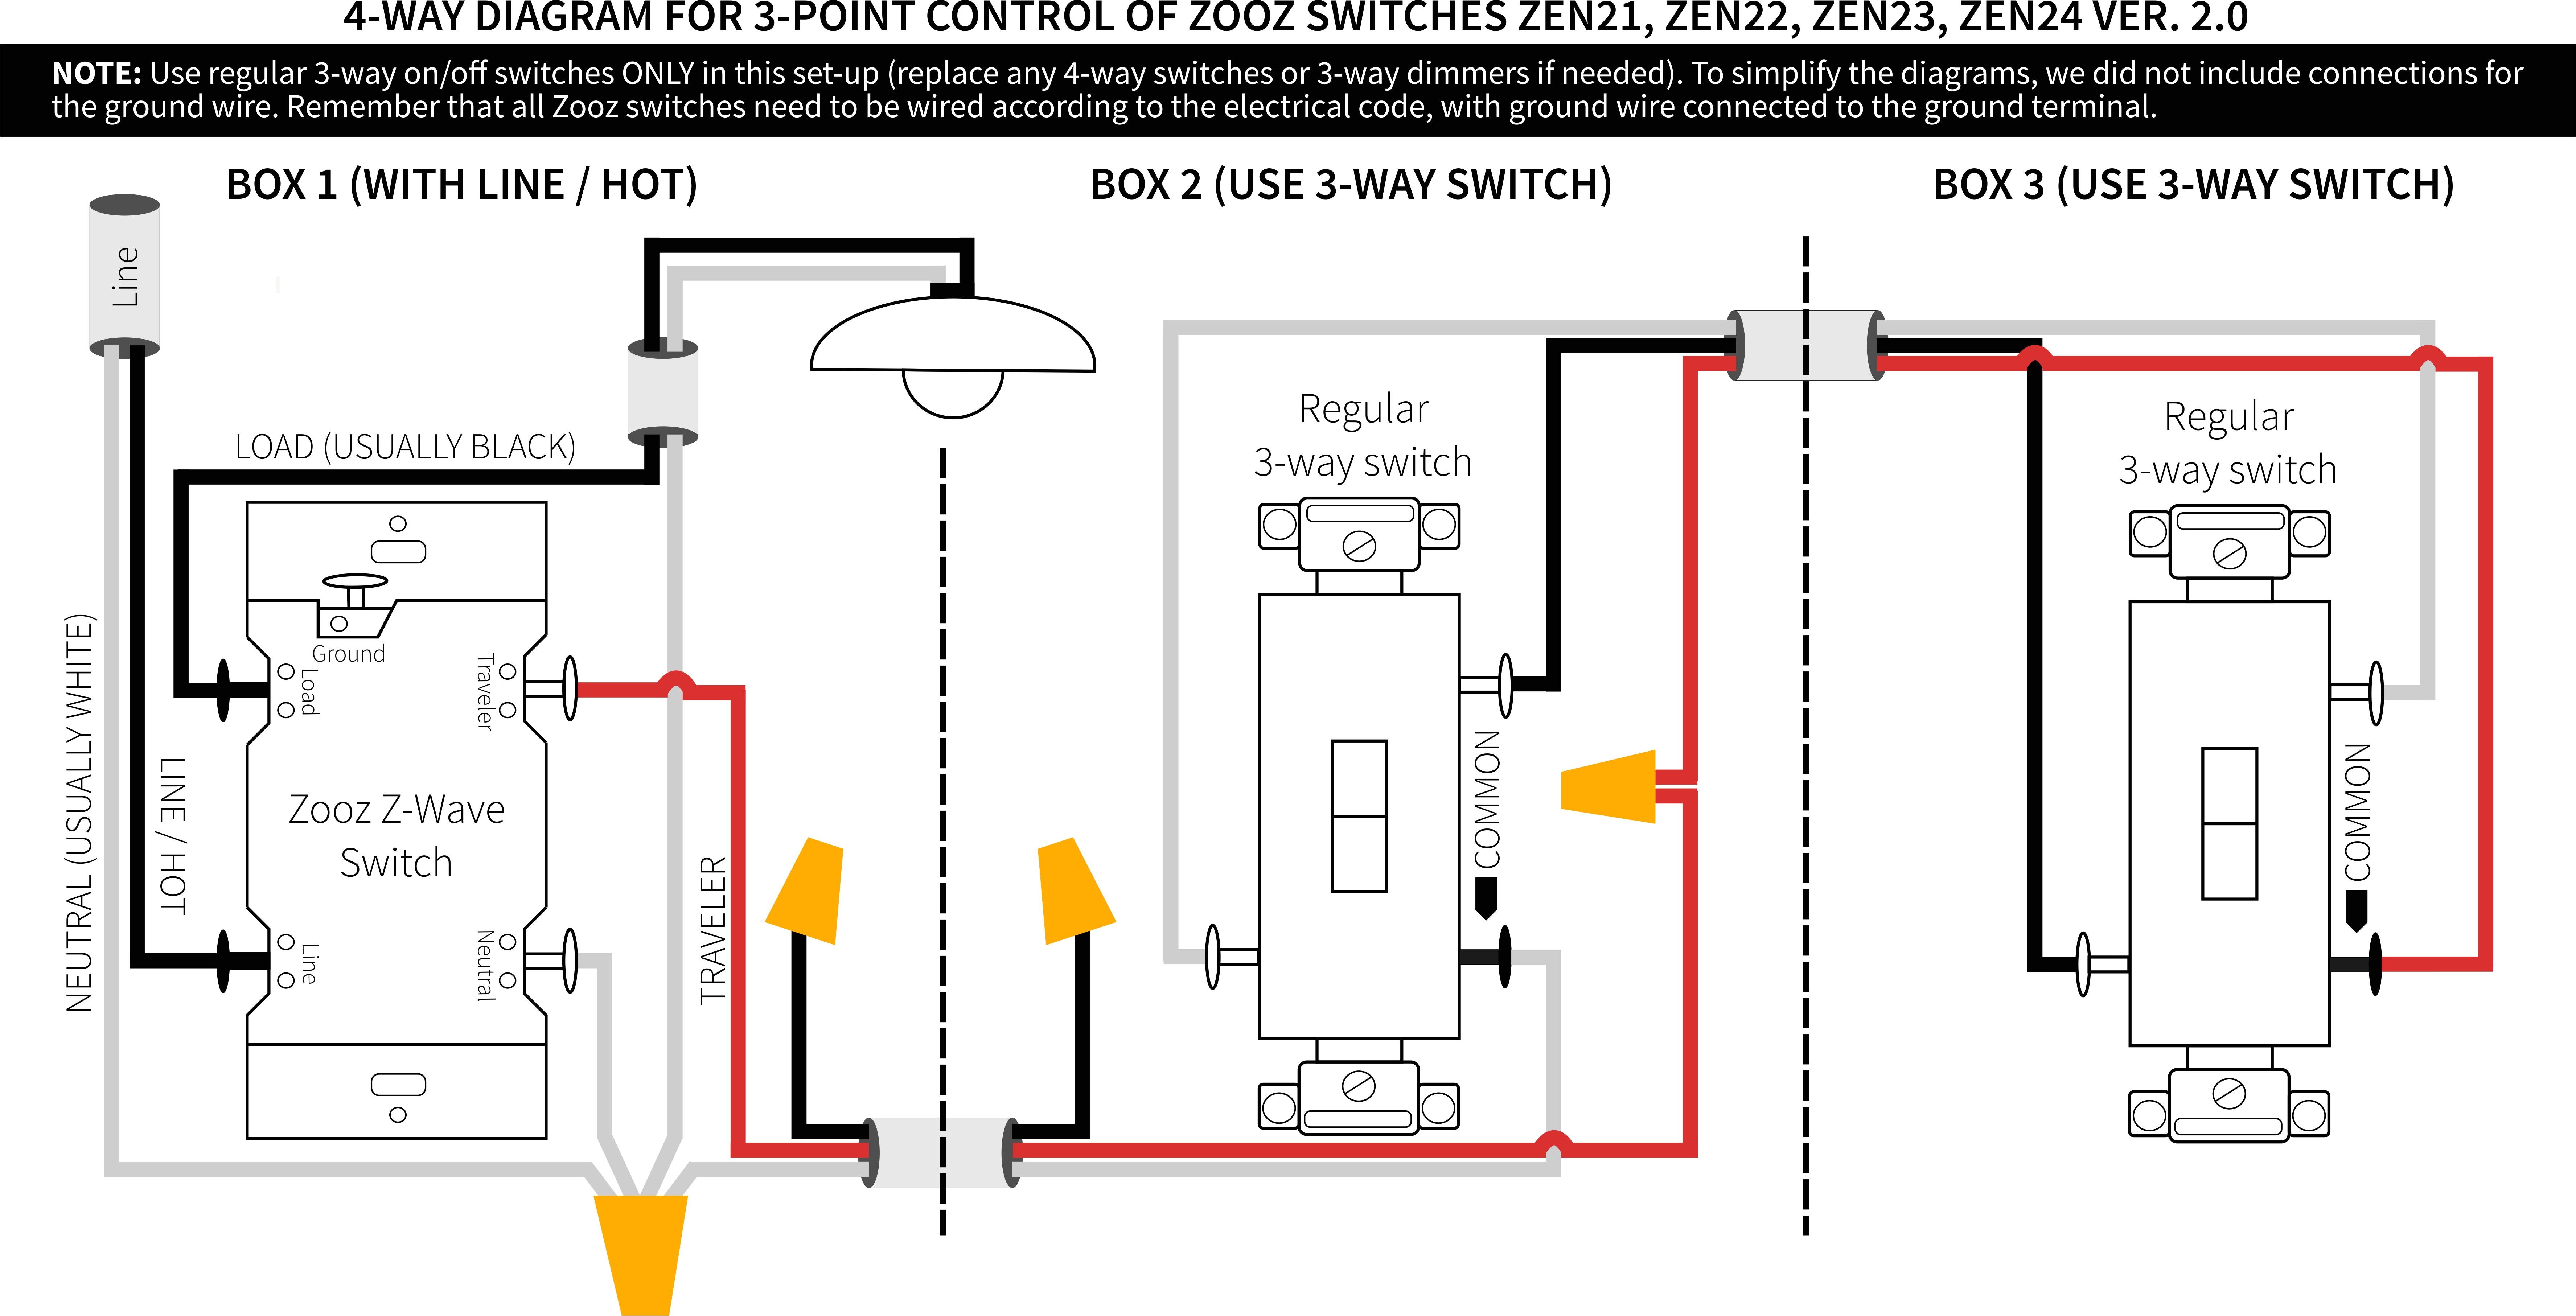 4 way dimmer wiring diagram wiring diagrams for lutron 4 way wiring diagram ge dimmer switch